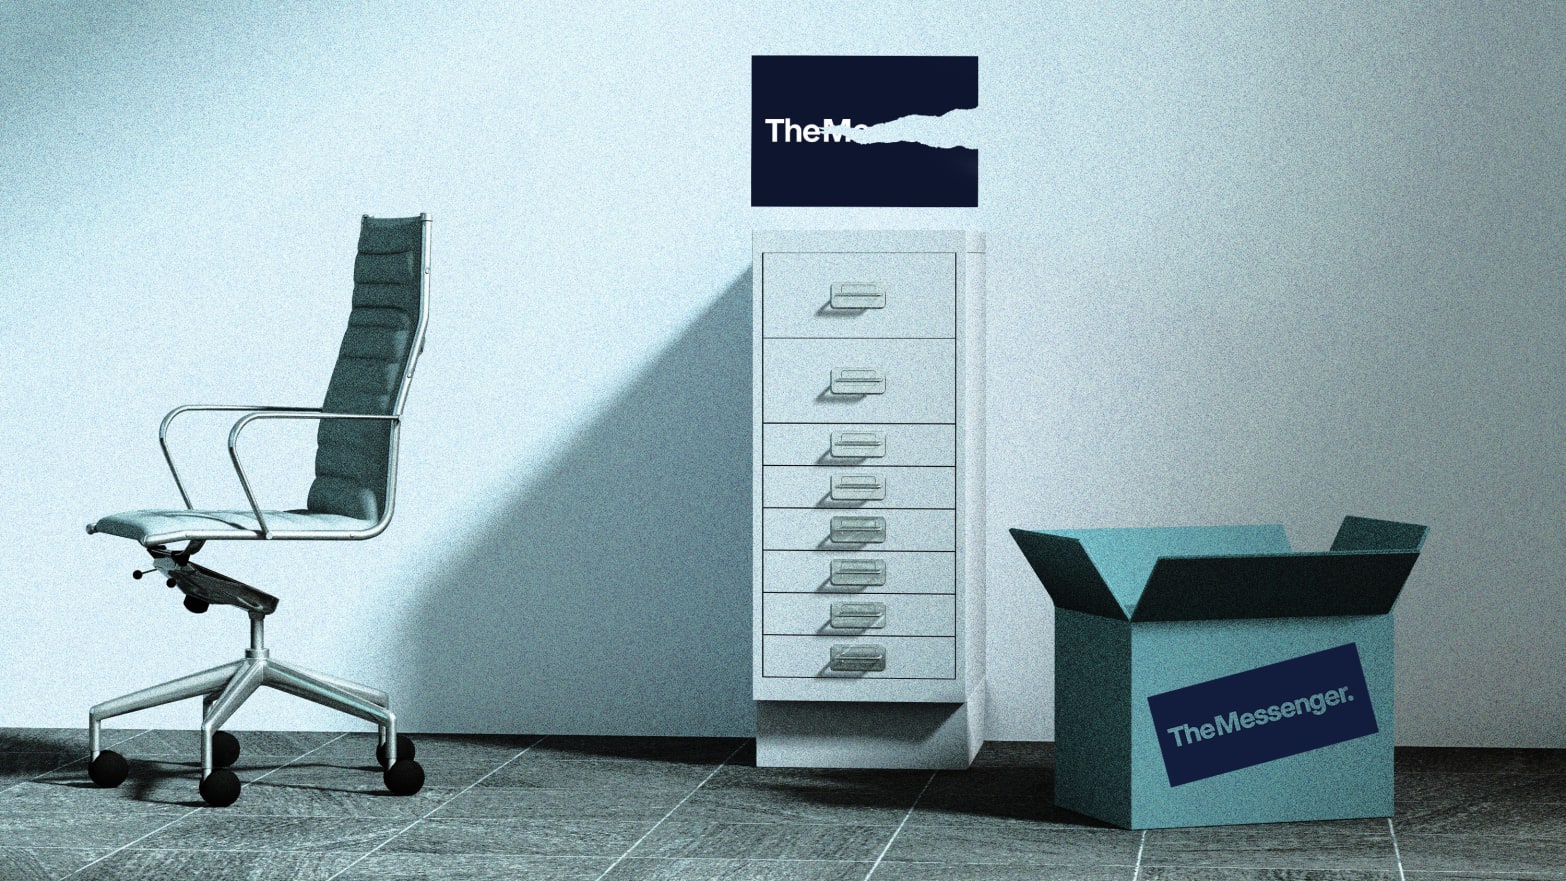 An illustration including a photo of an empty office and The Messenger logo.